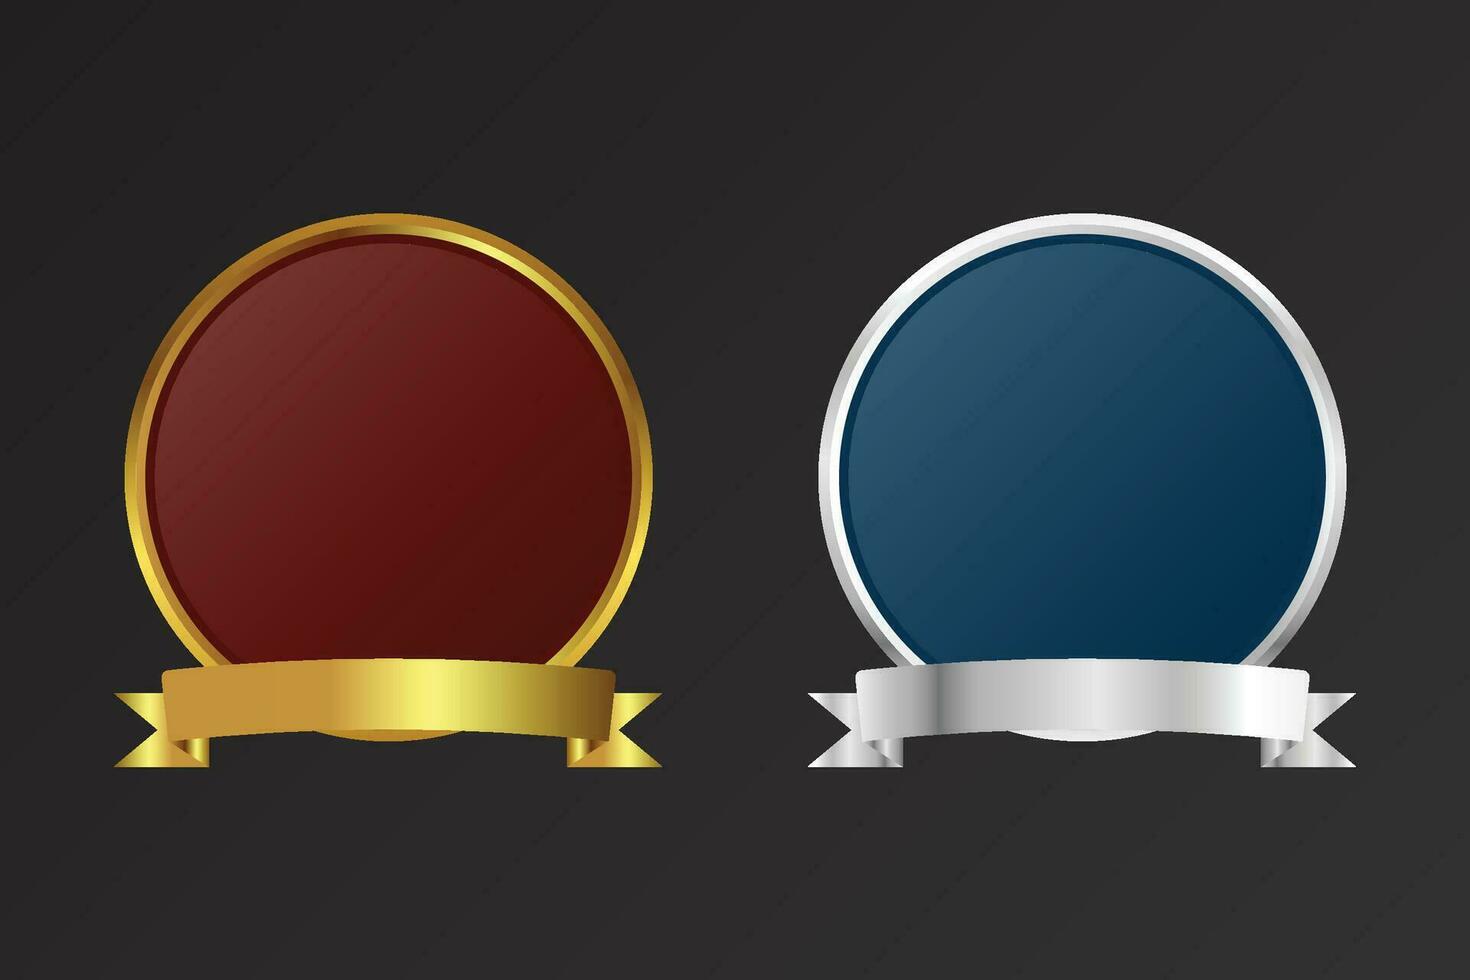 Luxurious golden and silver badge vector with ribbons and text space. Blank round badge element vector on a dark background. Celebration or official badge design with dark red and blue colors.